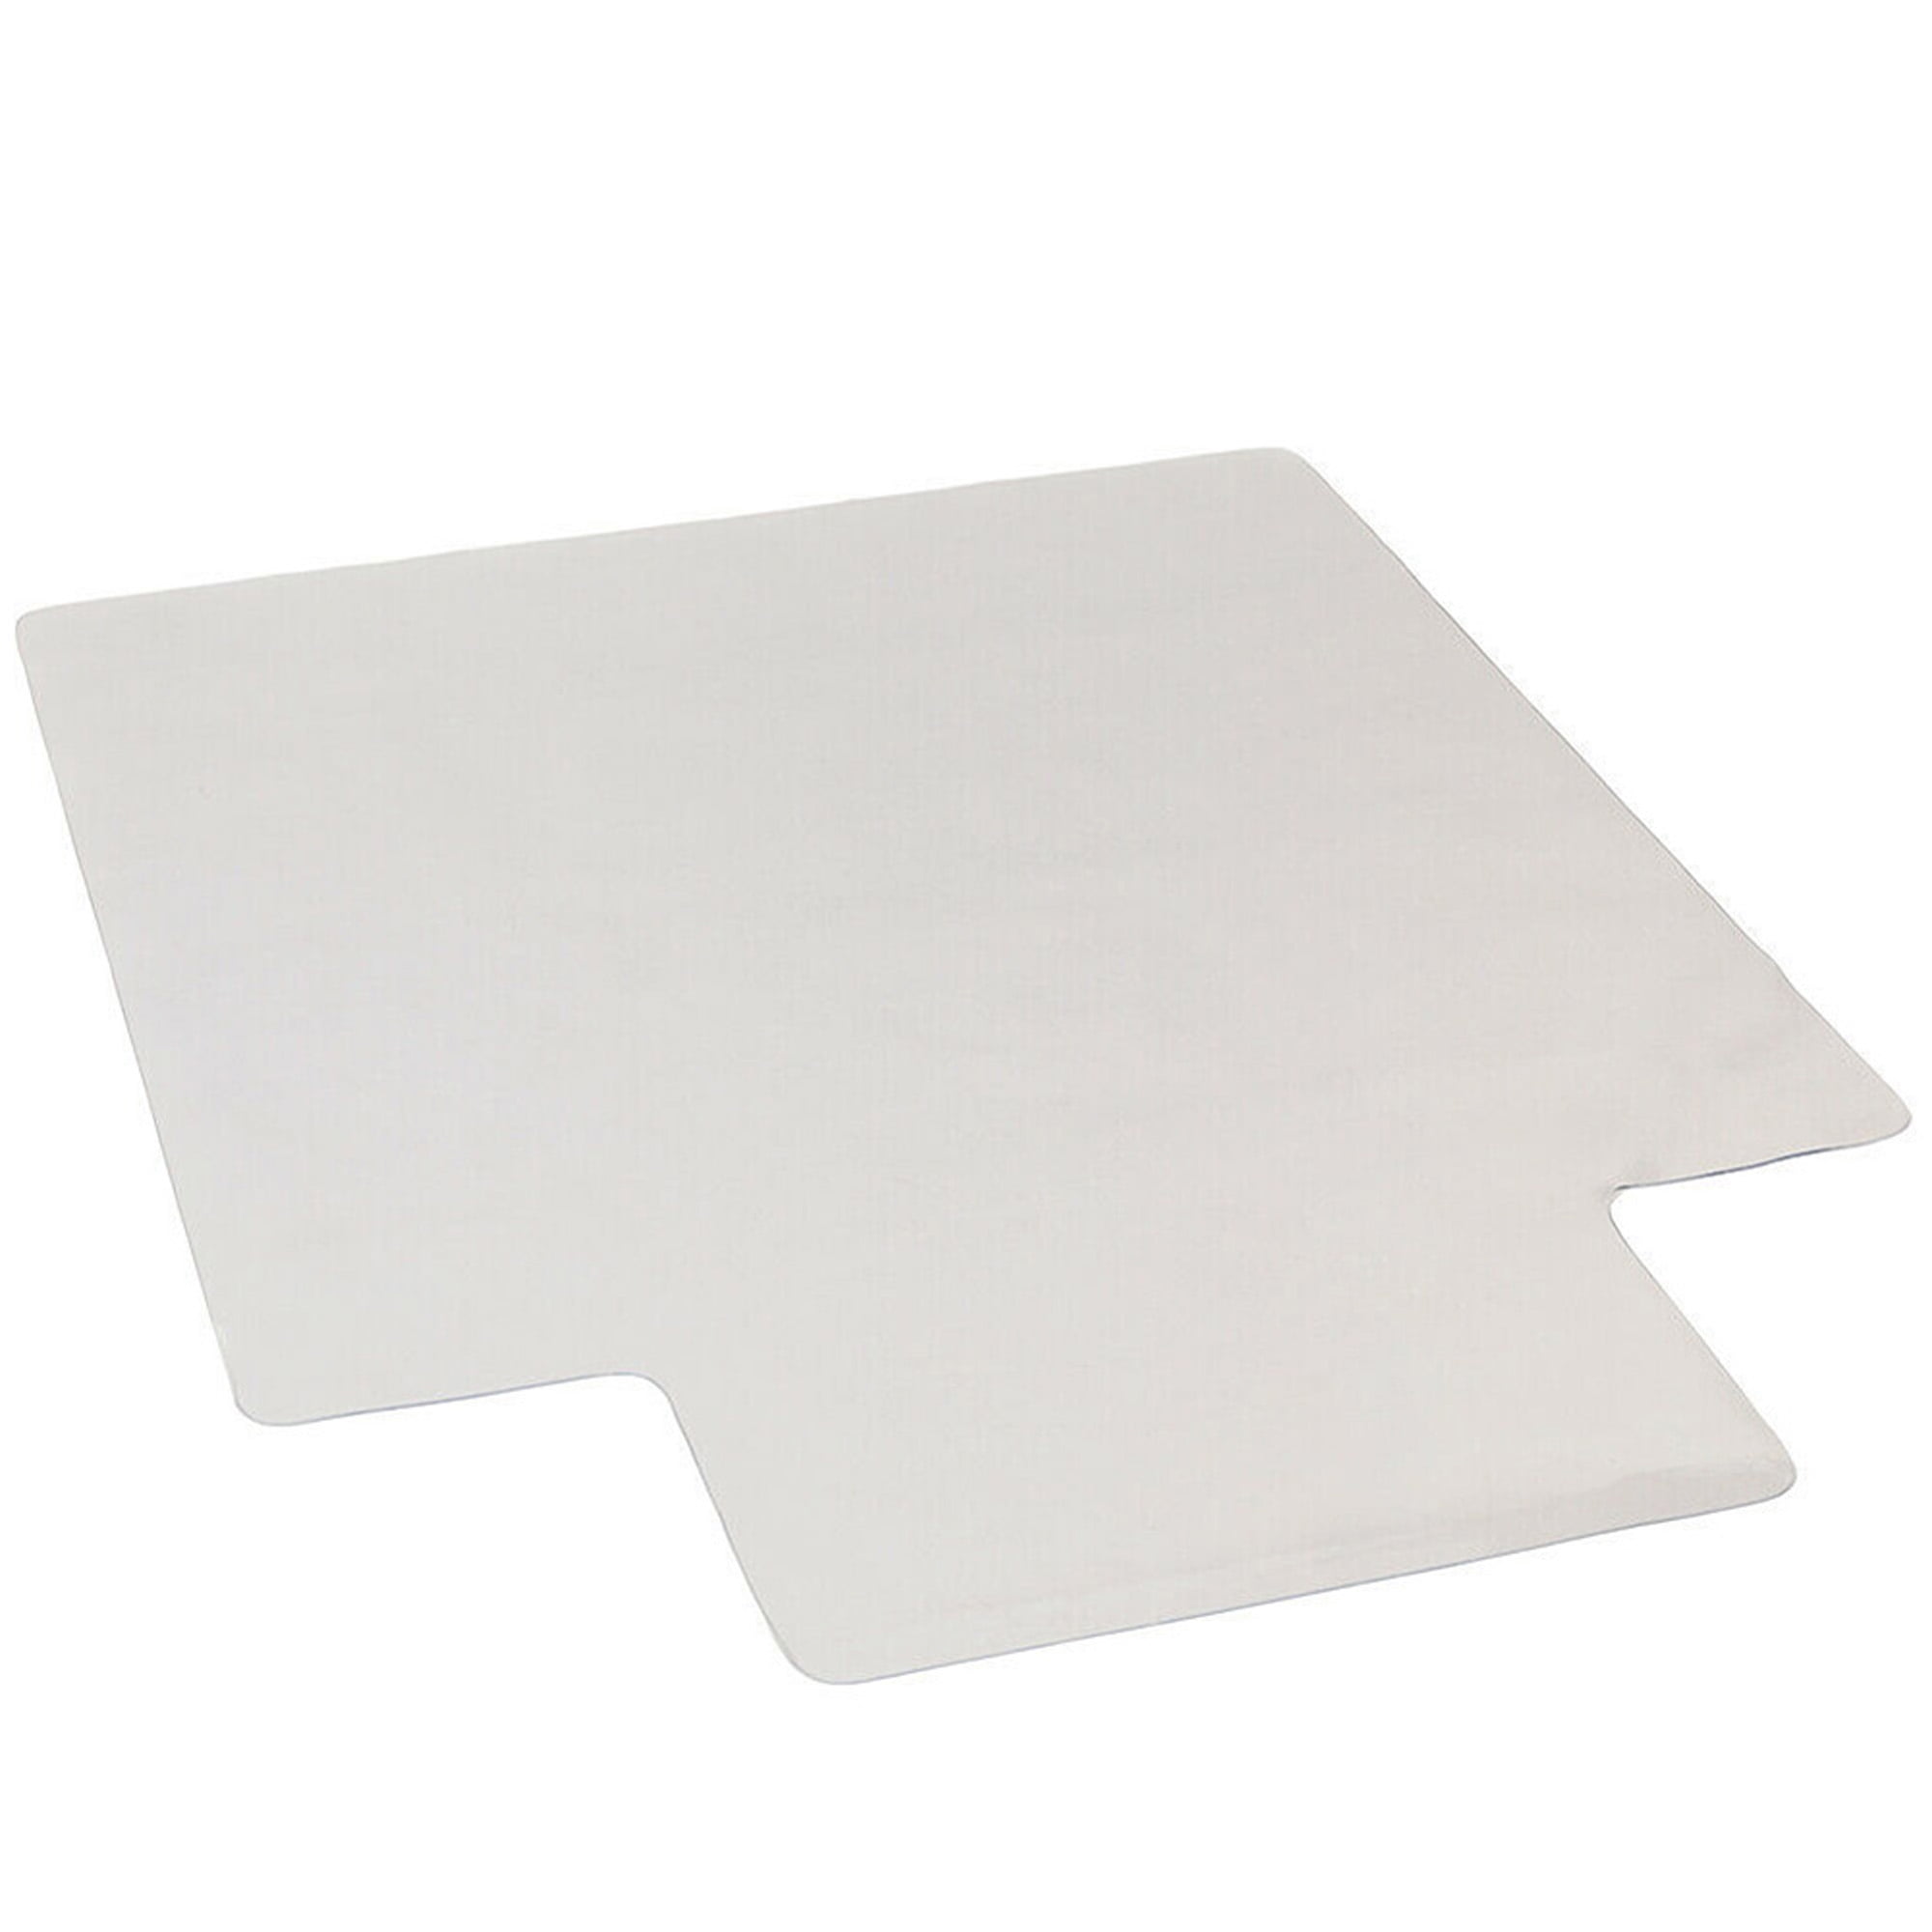 90x120cm jHuanic Transparent Chair Mat Non-Slip Desk Mat Clear Frosted Wooden Floor Carpet Protector Mat Large PVC T Shape Furniture Mat for Home Office